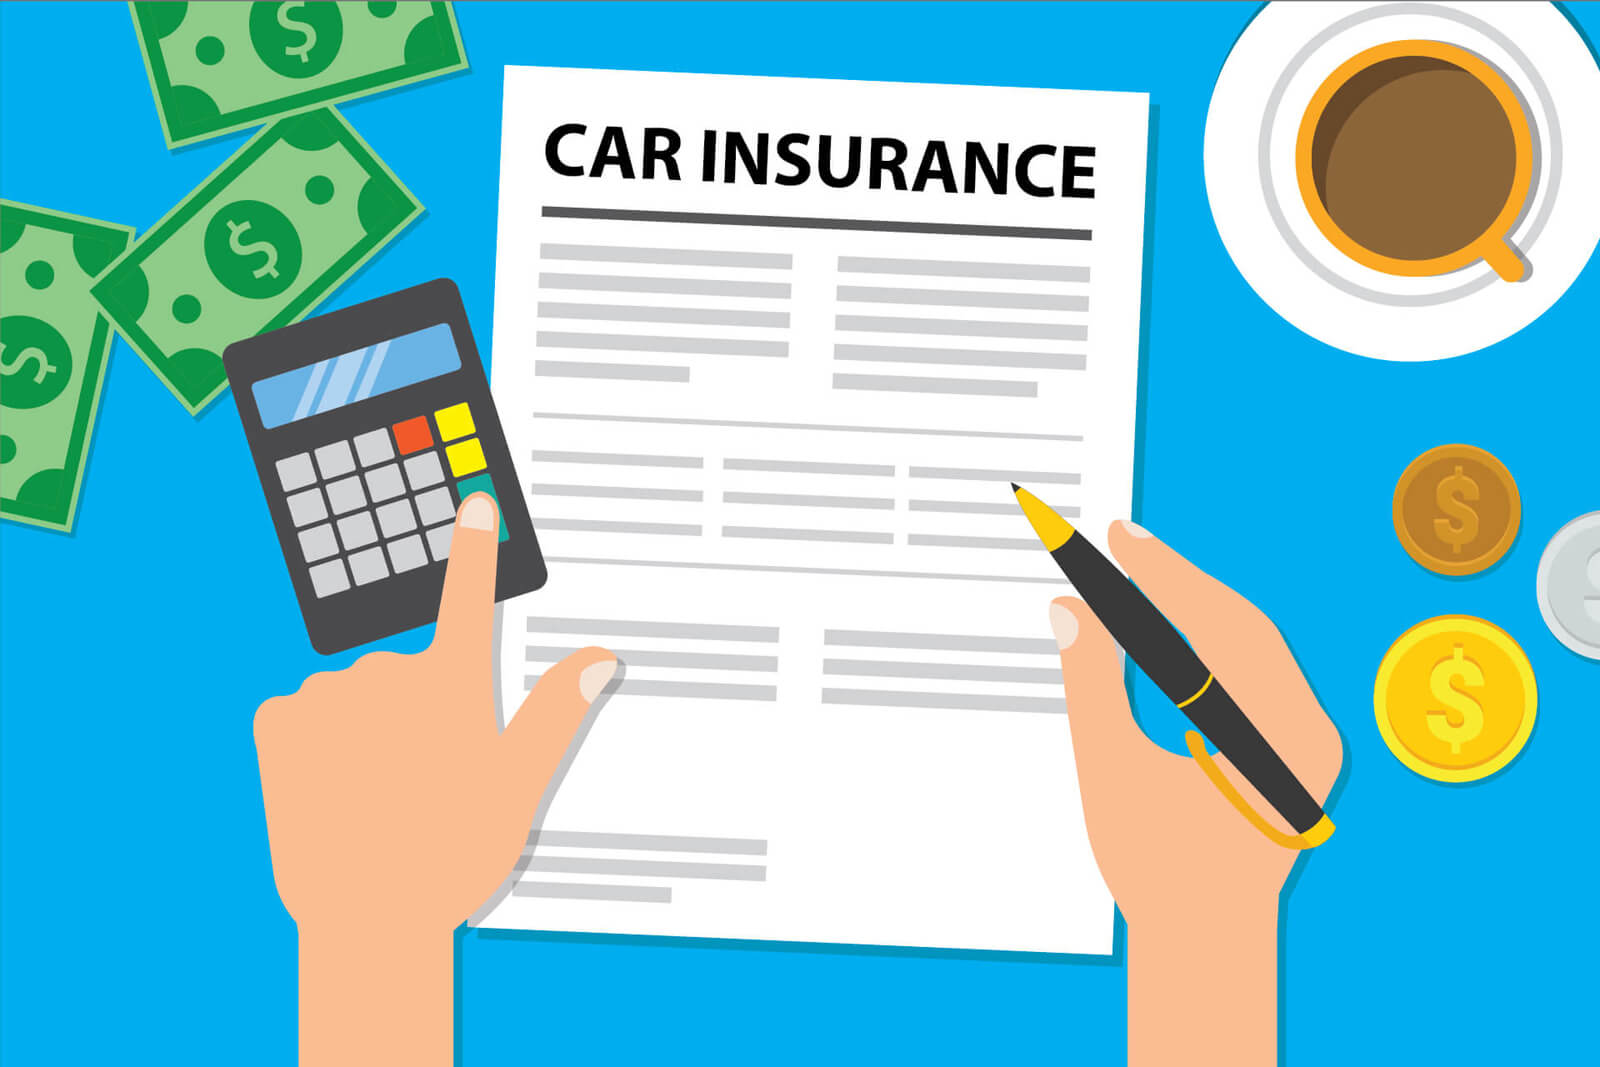 Do you need insurance on a car you don’t drive?